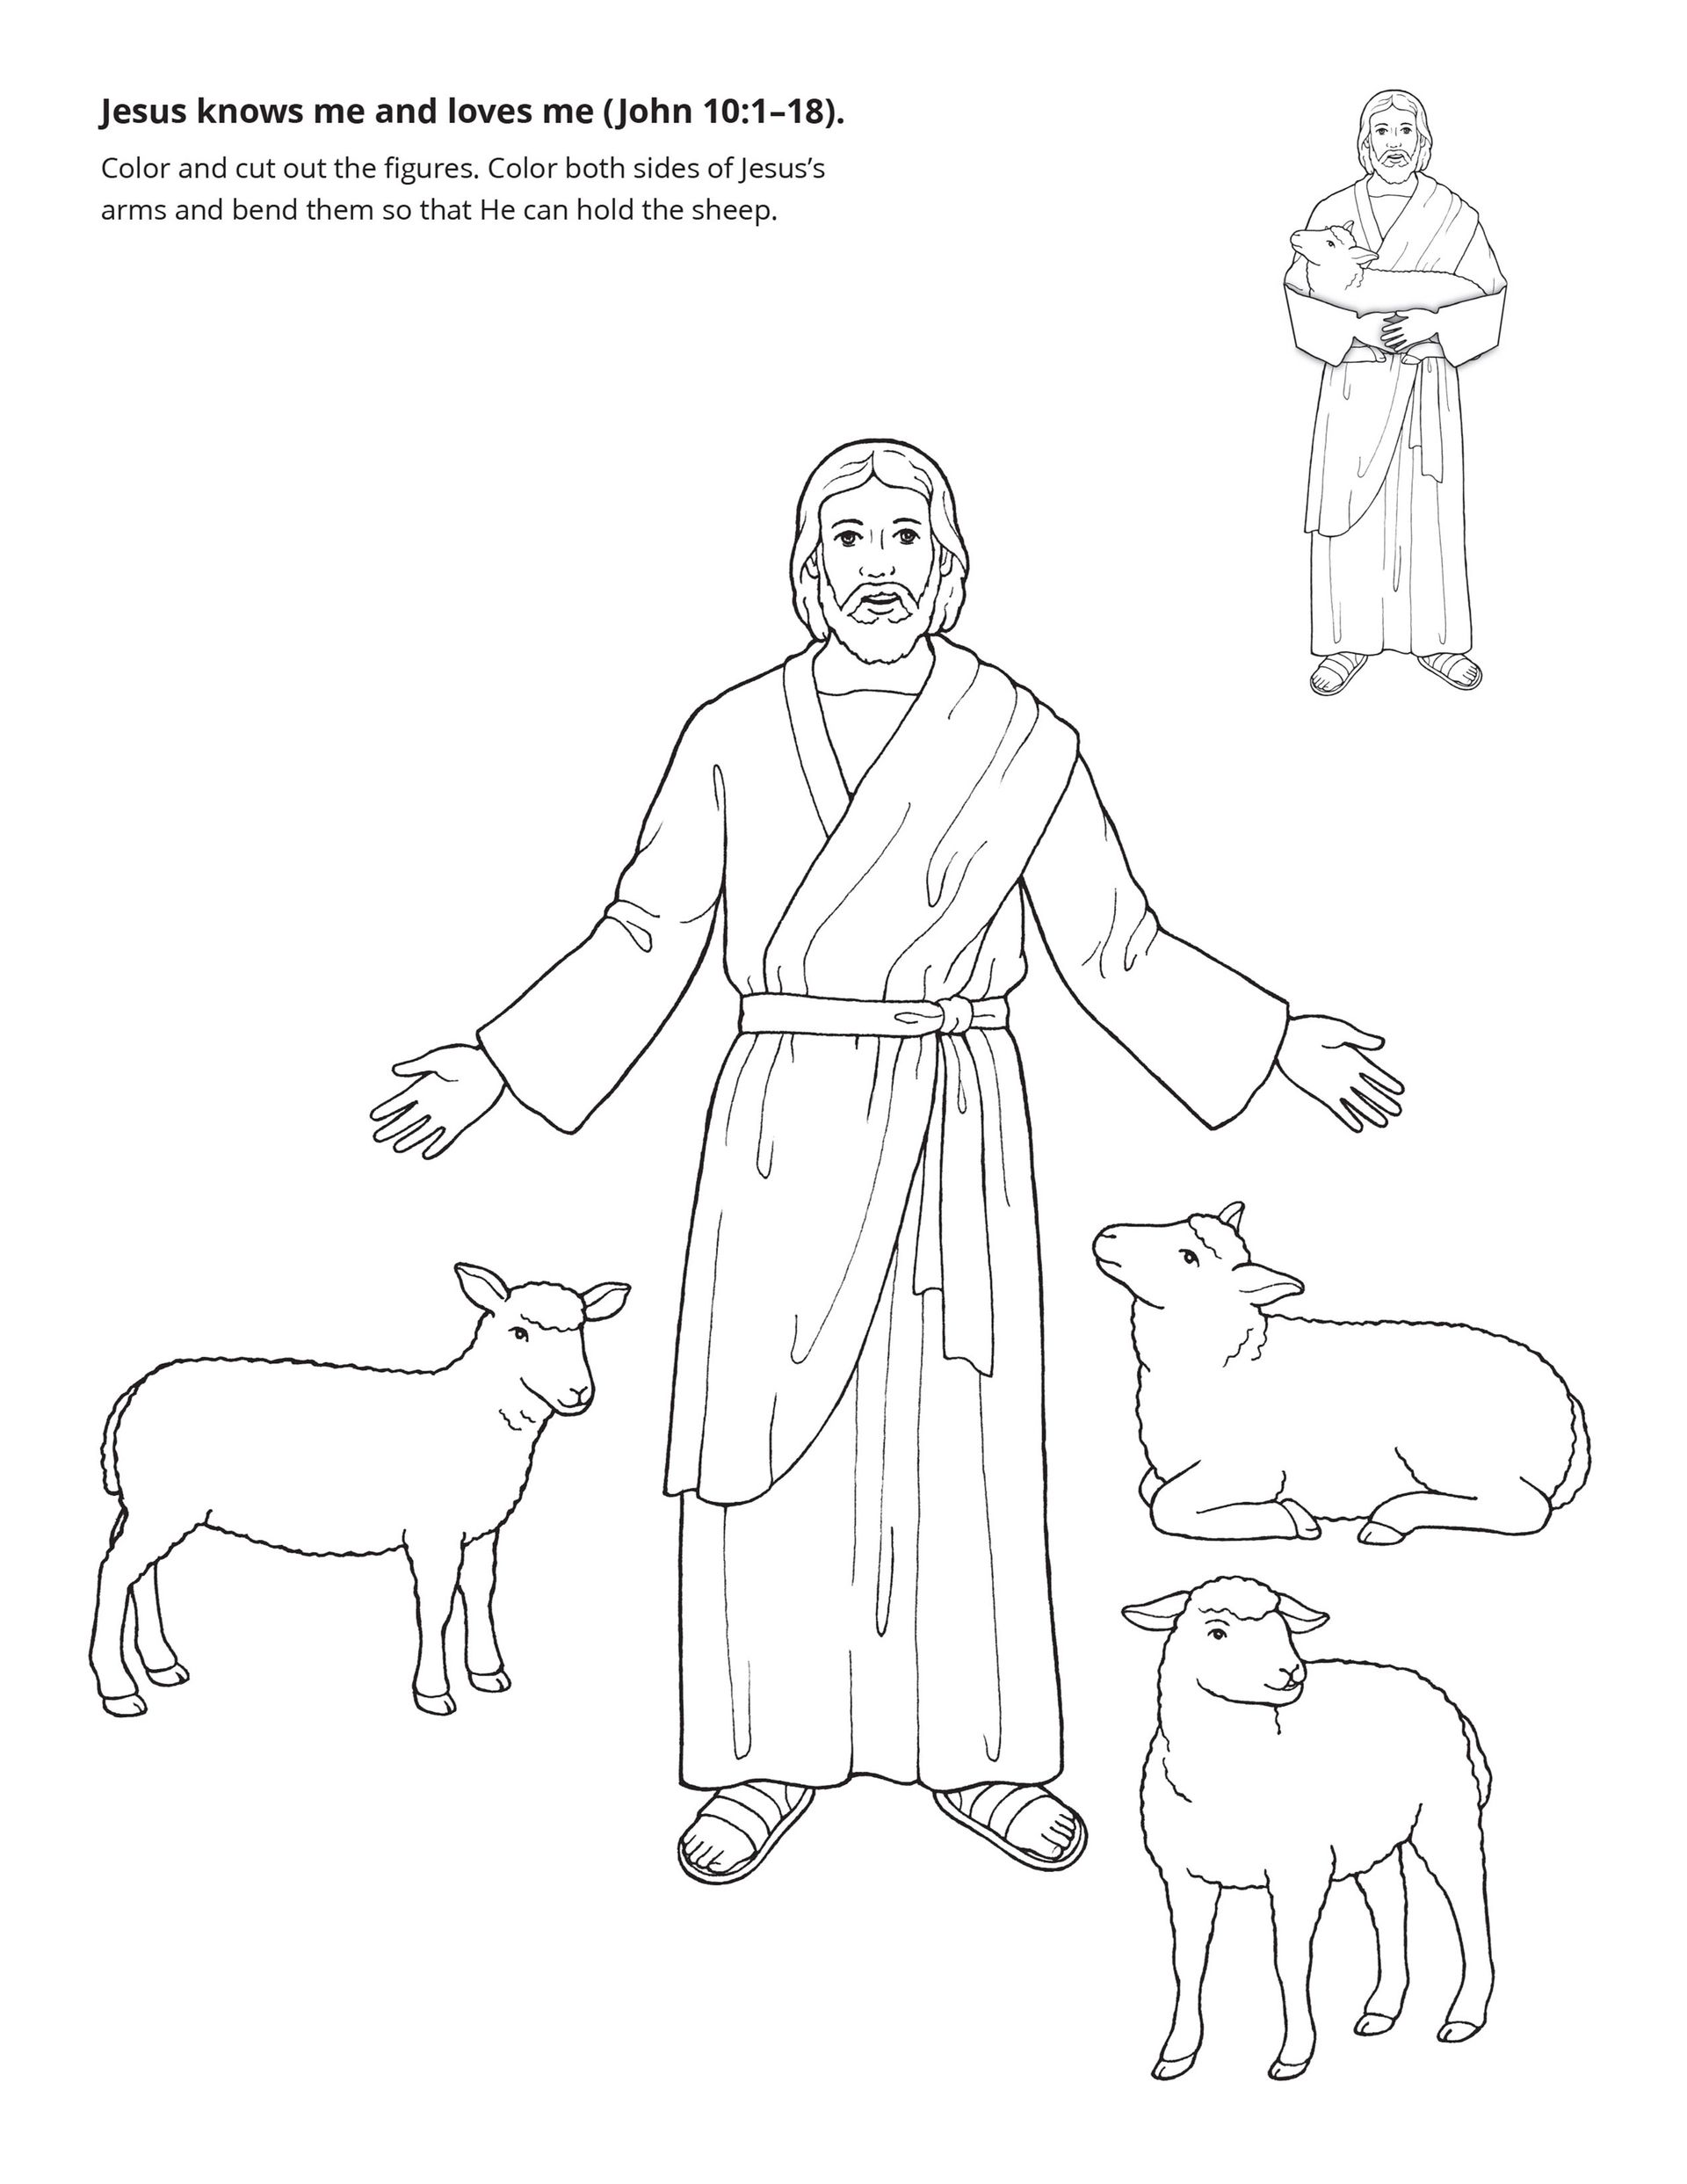 An illustration of Christ with sheep.